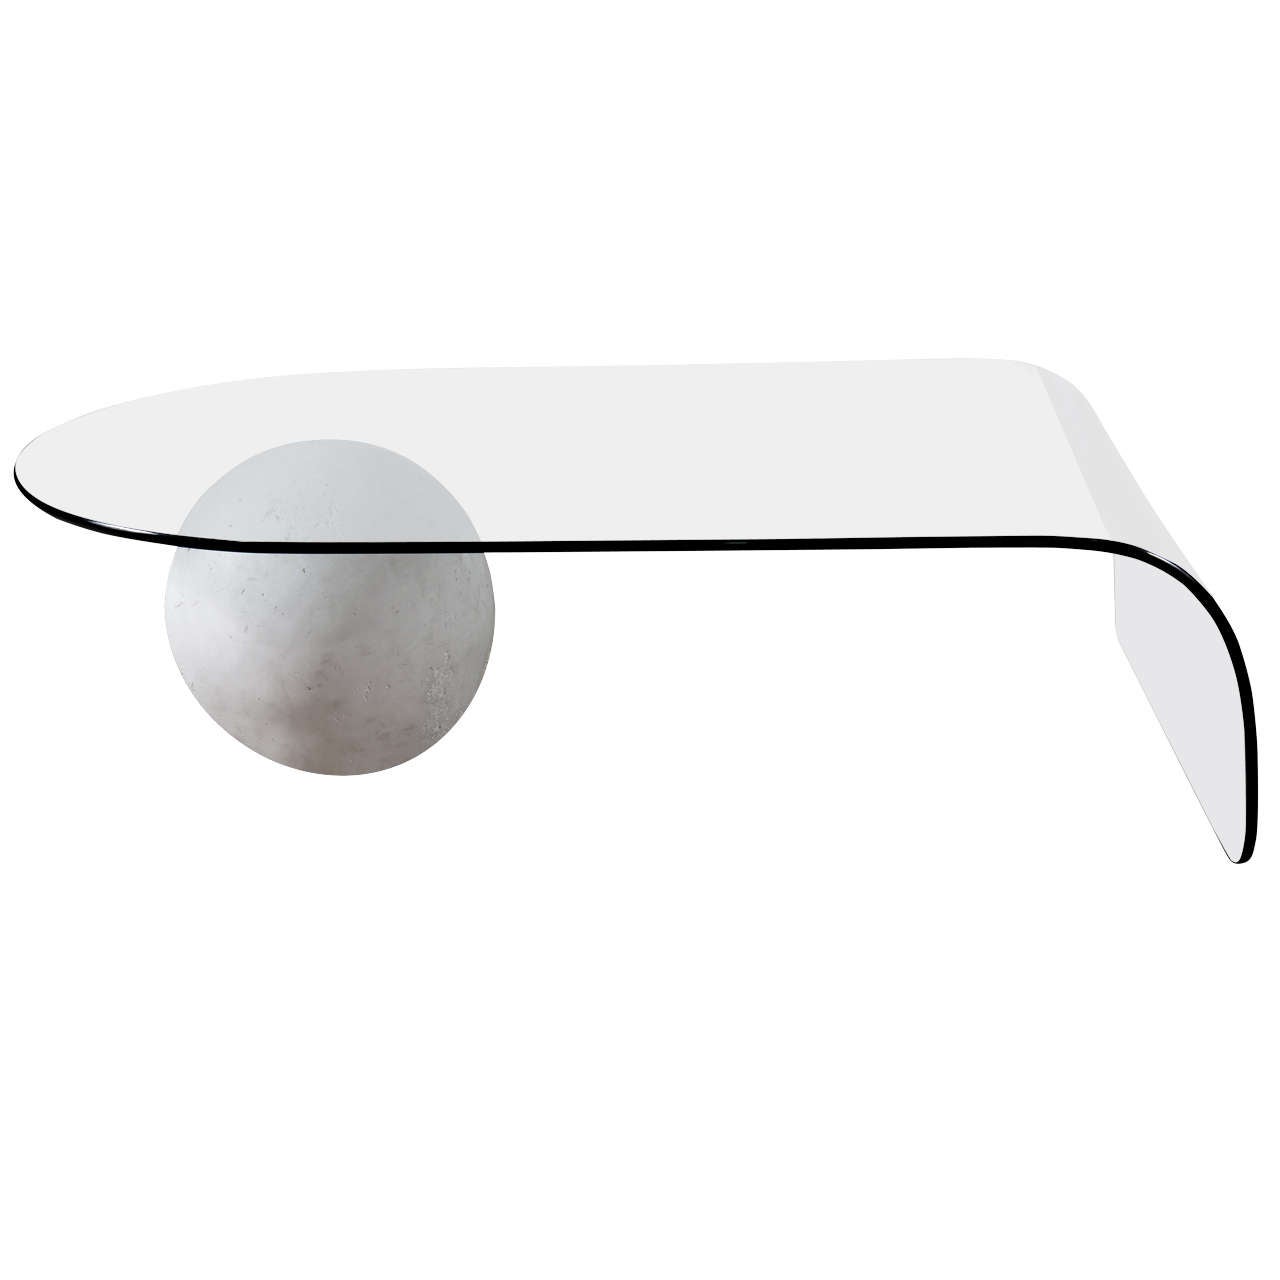 A Glass Coffee Table with a Plaster Ball